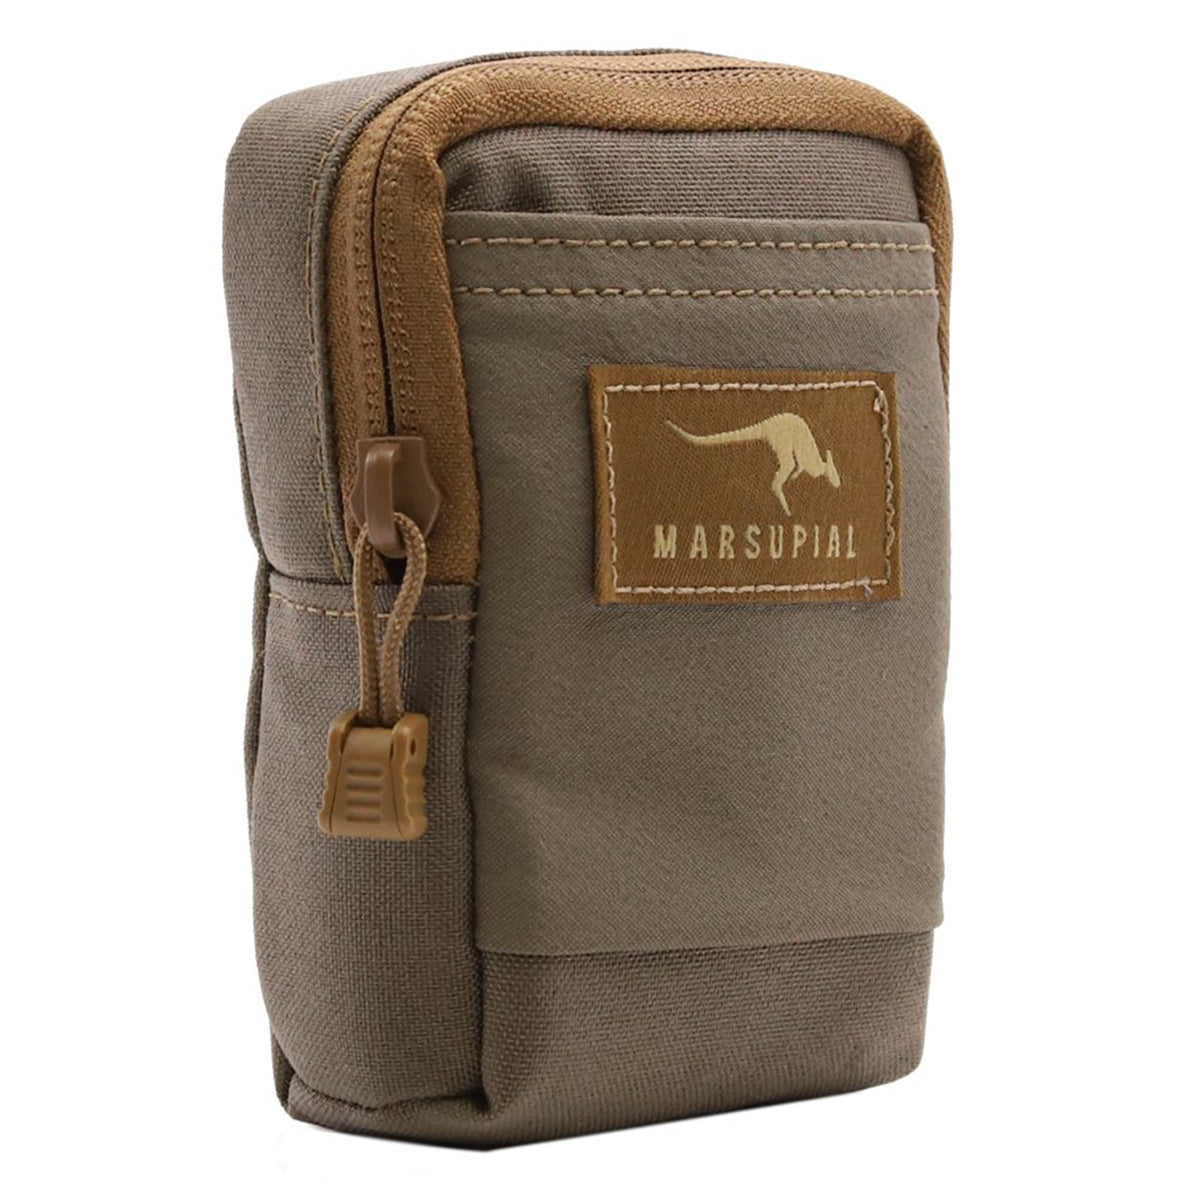 Marsupial Gear Small Zippered Pouch by Marsupial Gear | Optics - goHUNT Shop